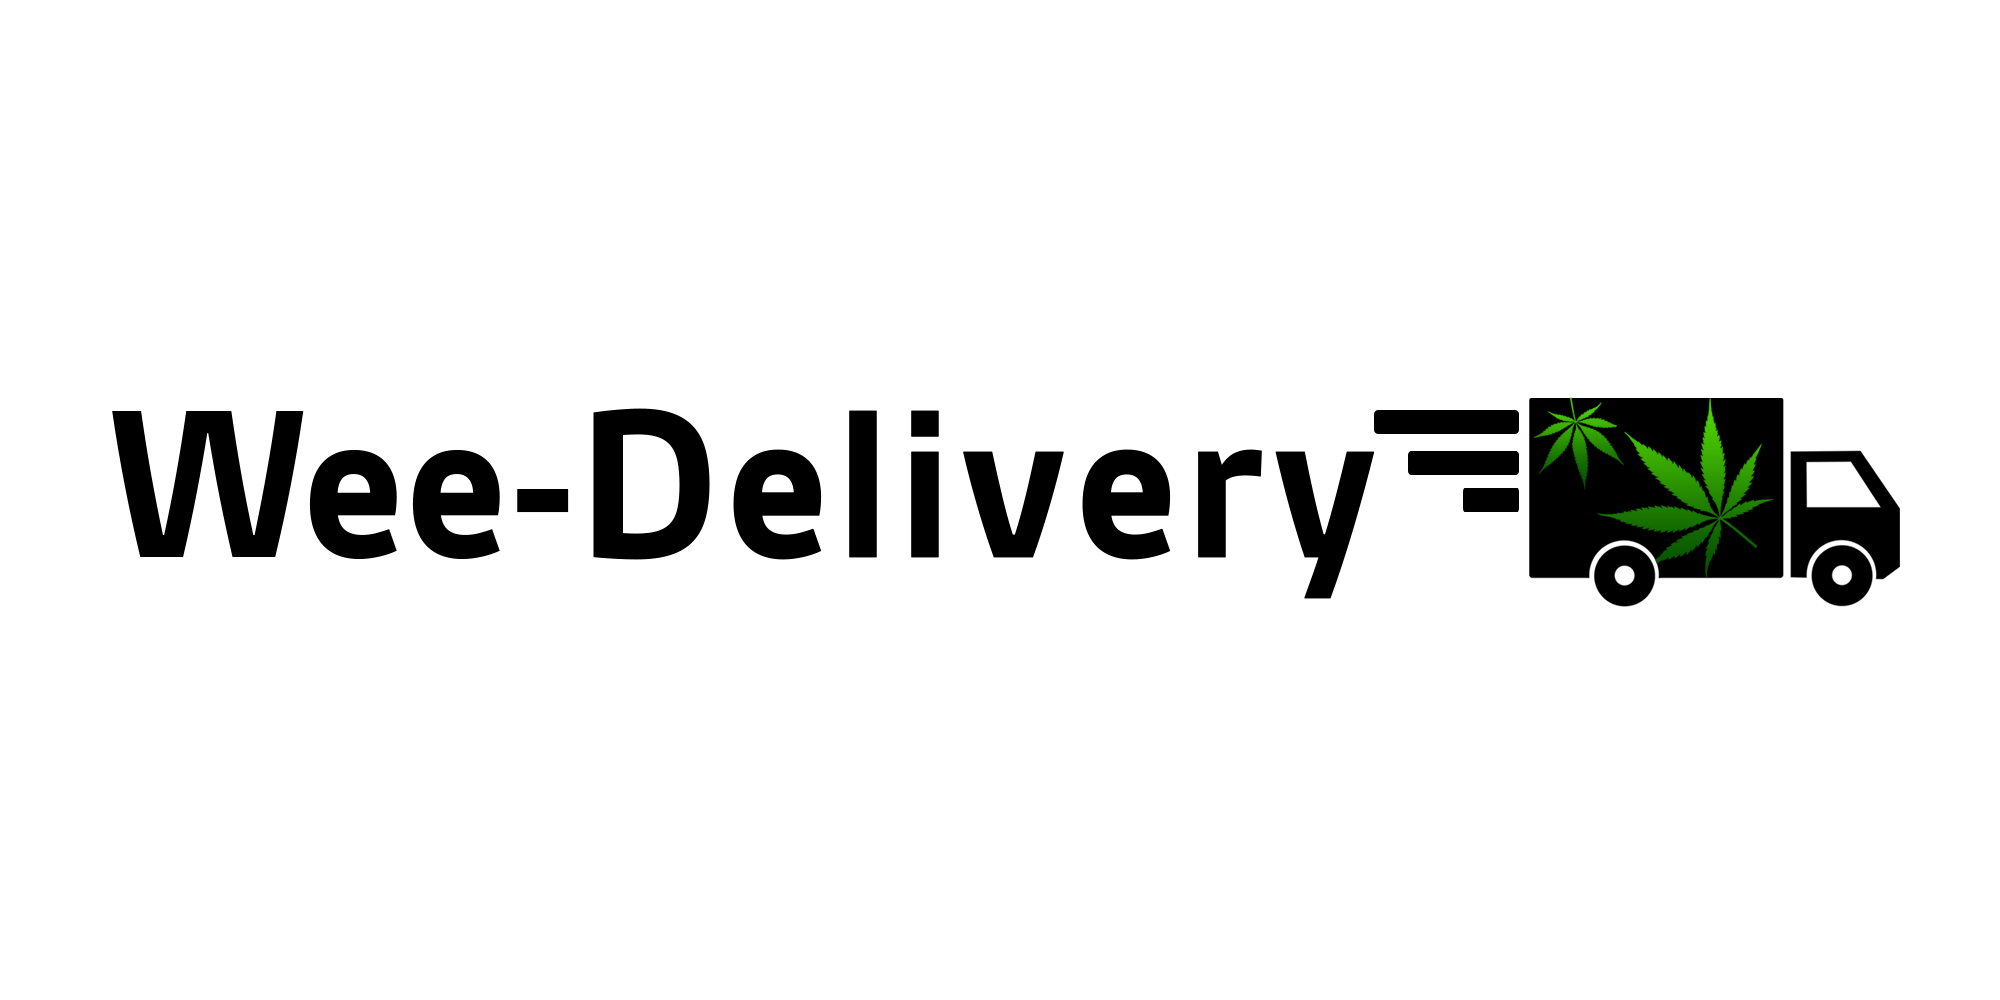 Wee-delivery logo image